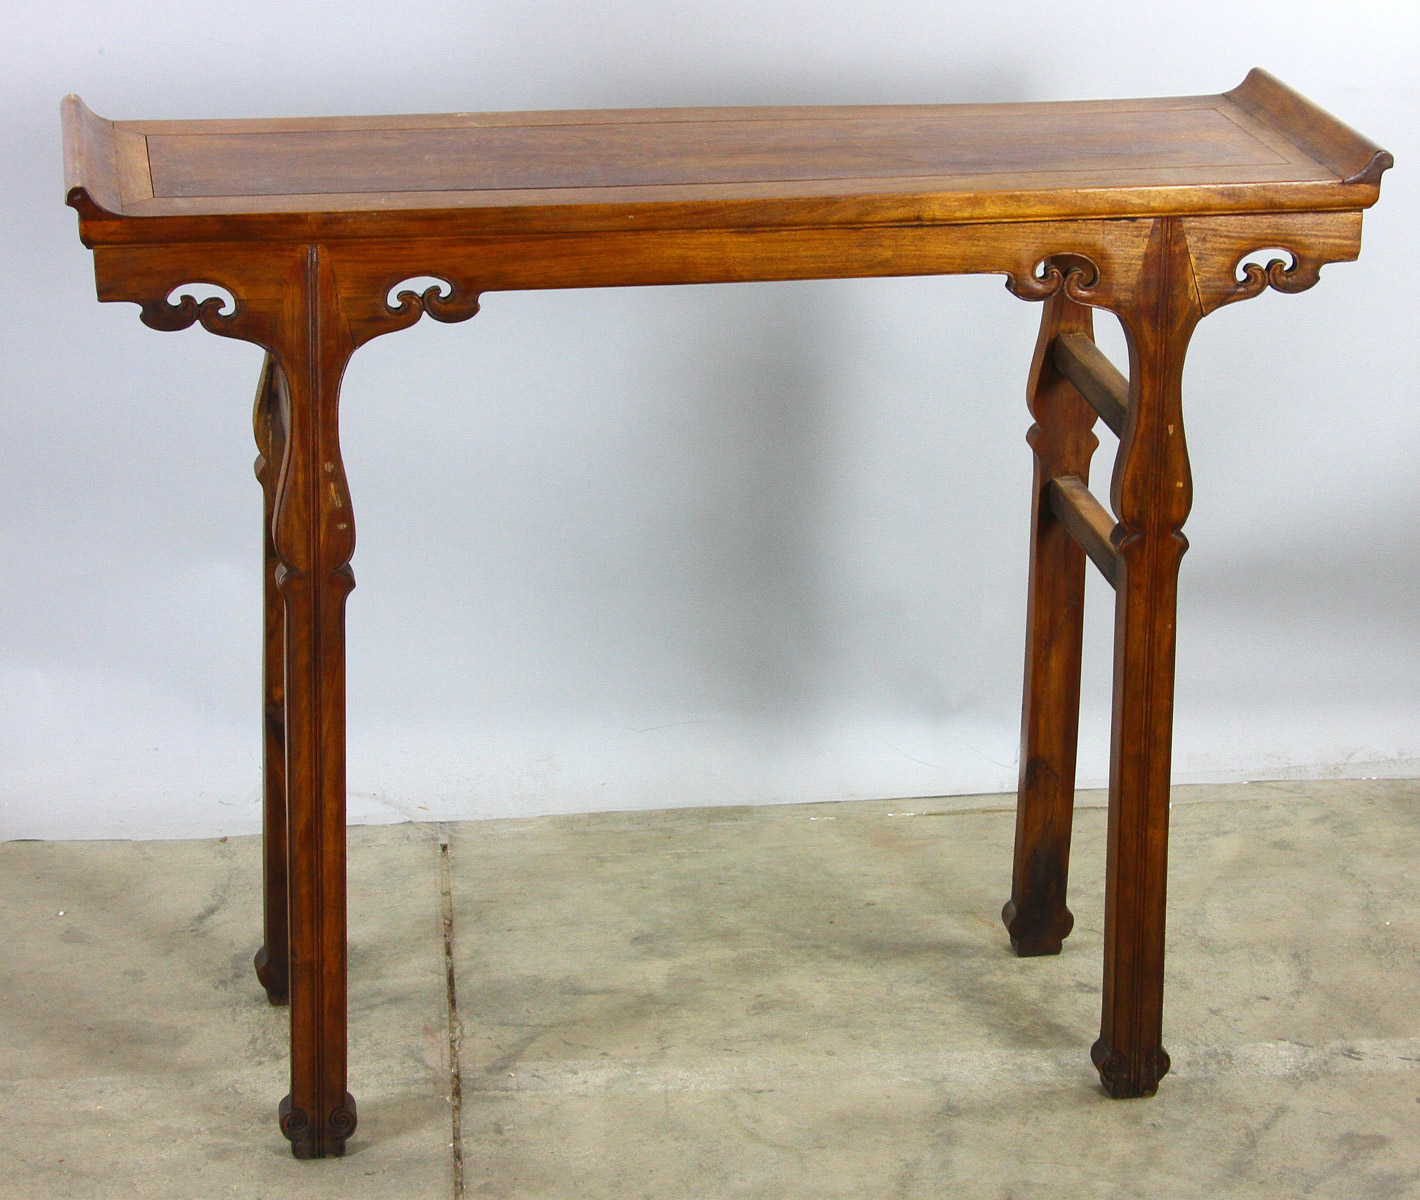 Chinese huanghuali altar table, 33" x 41" x 13".